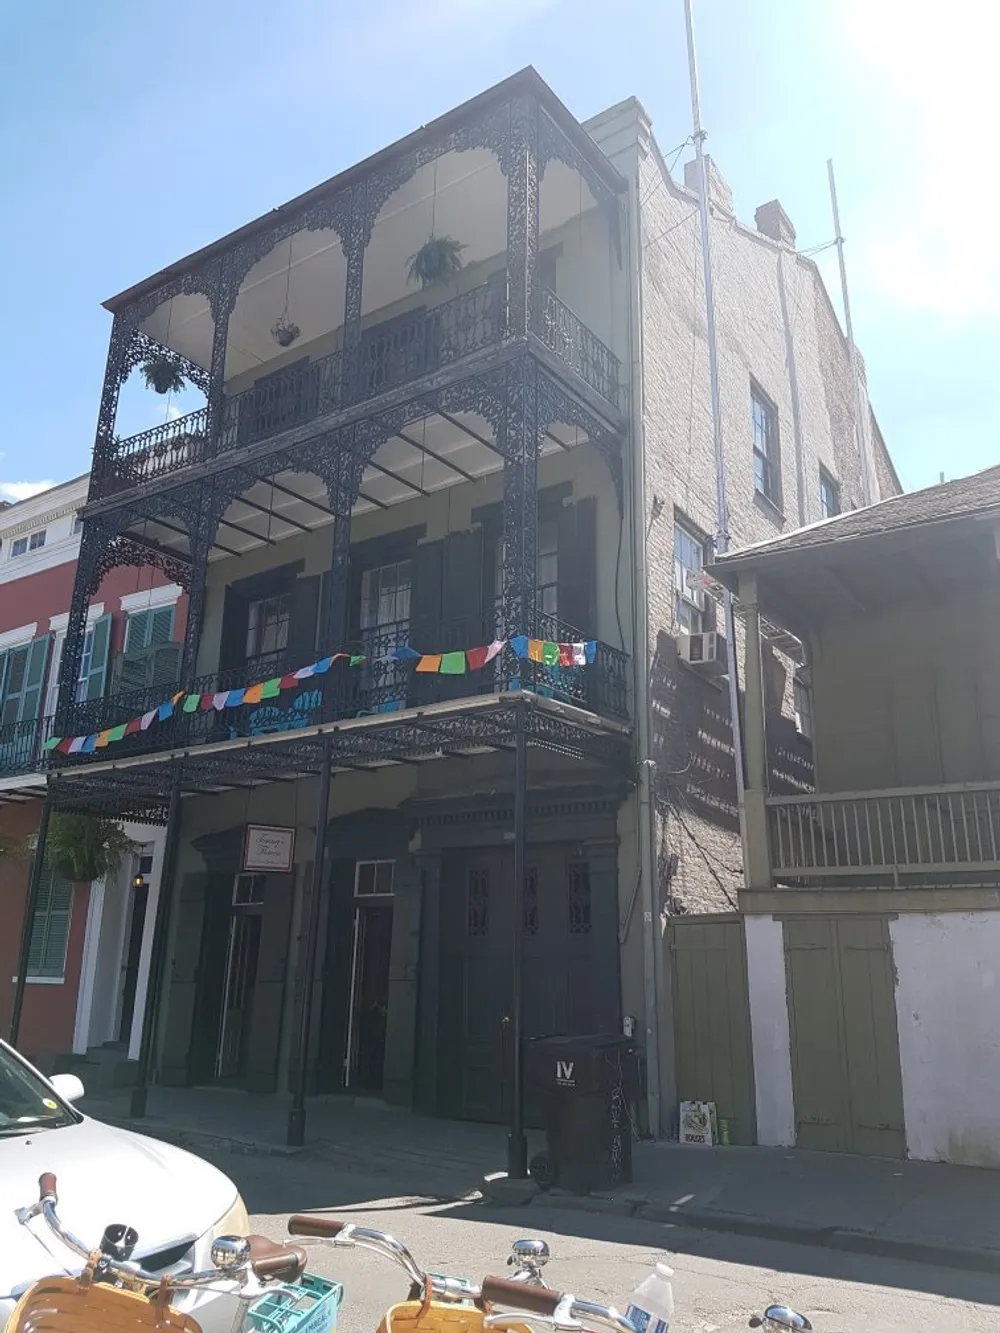 The image shows a traditional two-story building with wrought-iron balconies a few colorful flags hanging between the floors under a clear sky capturing a hint of the charming architectural style seen in places like the French Quarter of New Orleans